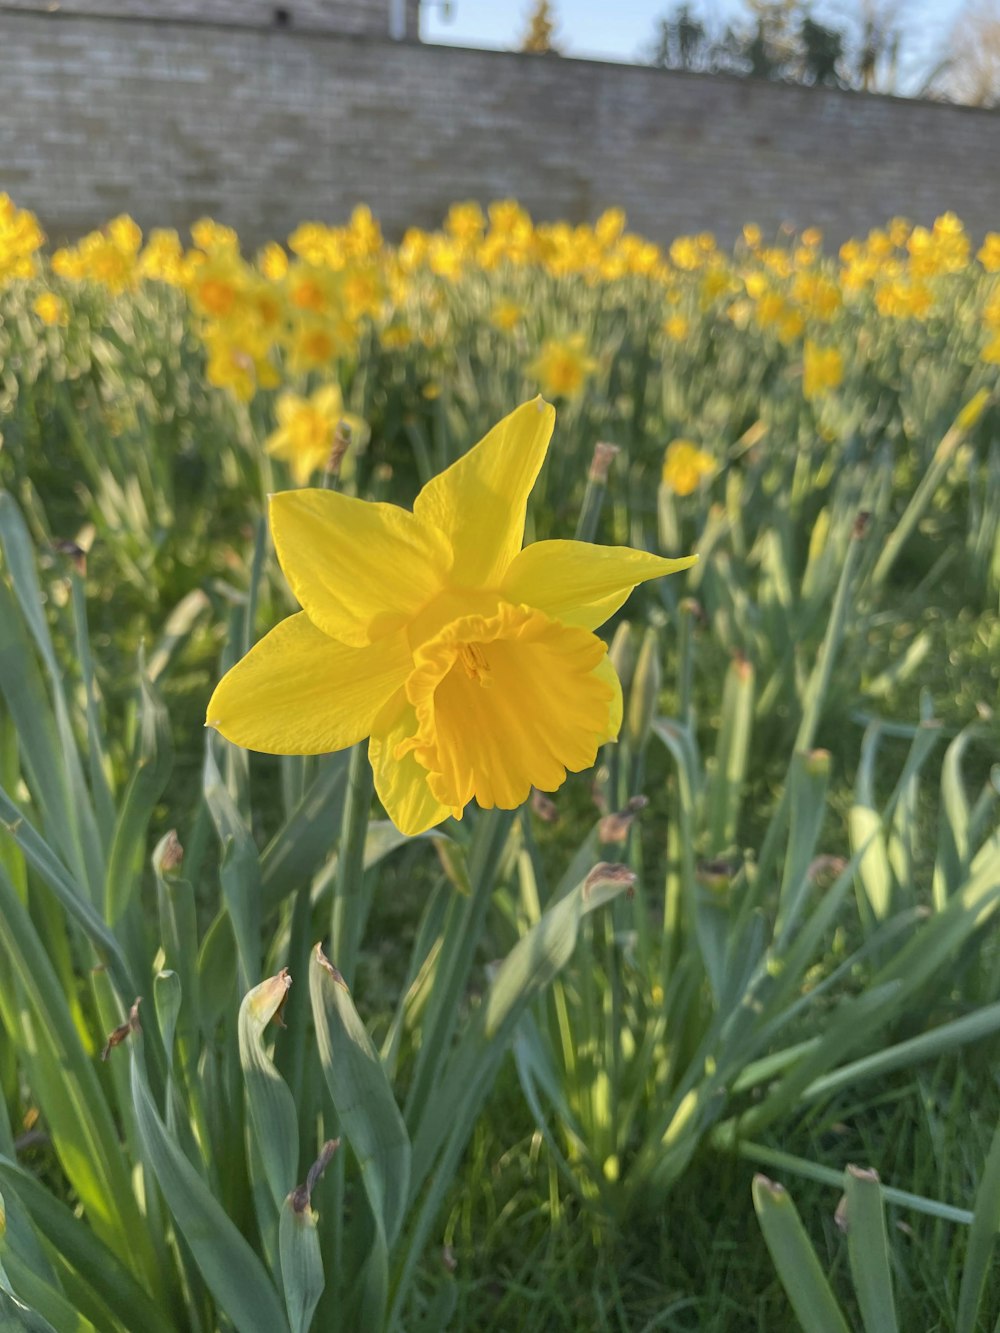 a yellow flower in a field of grass